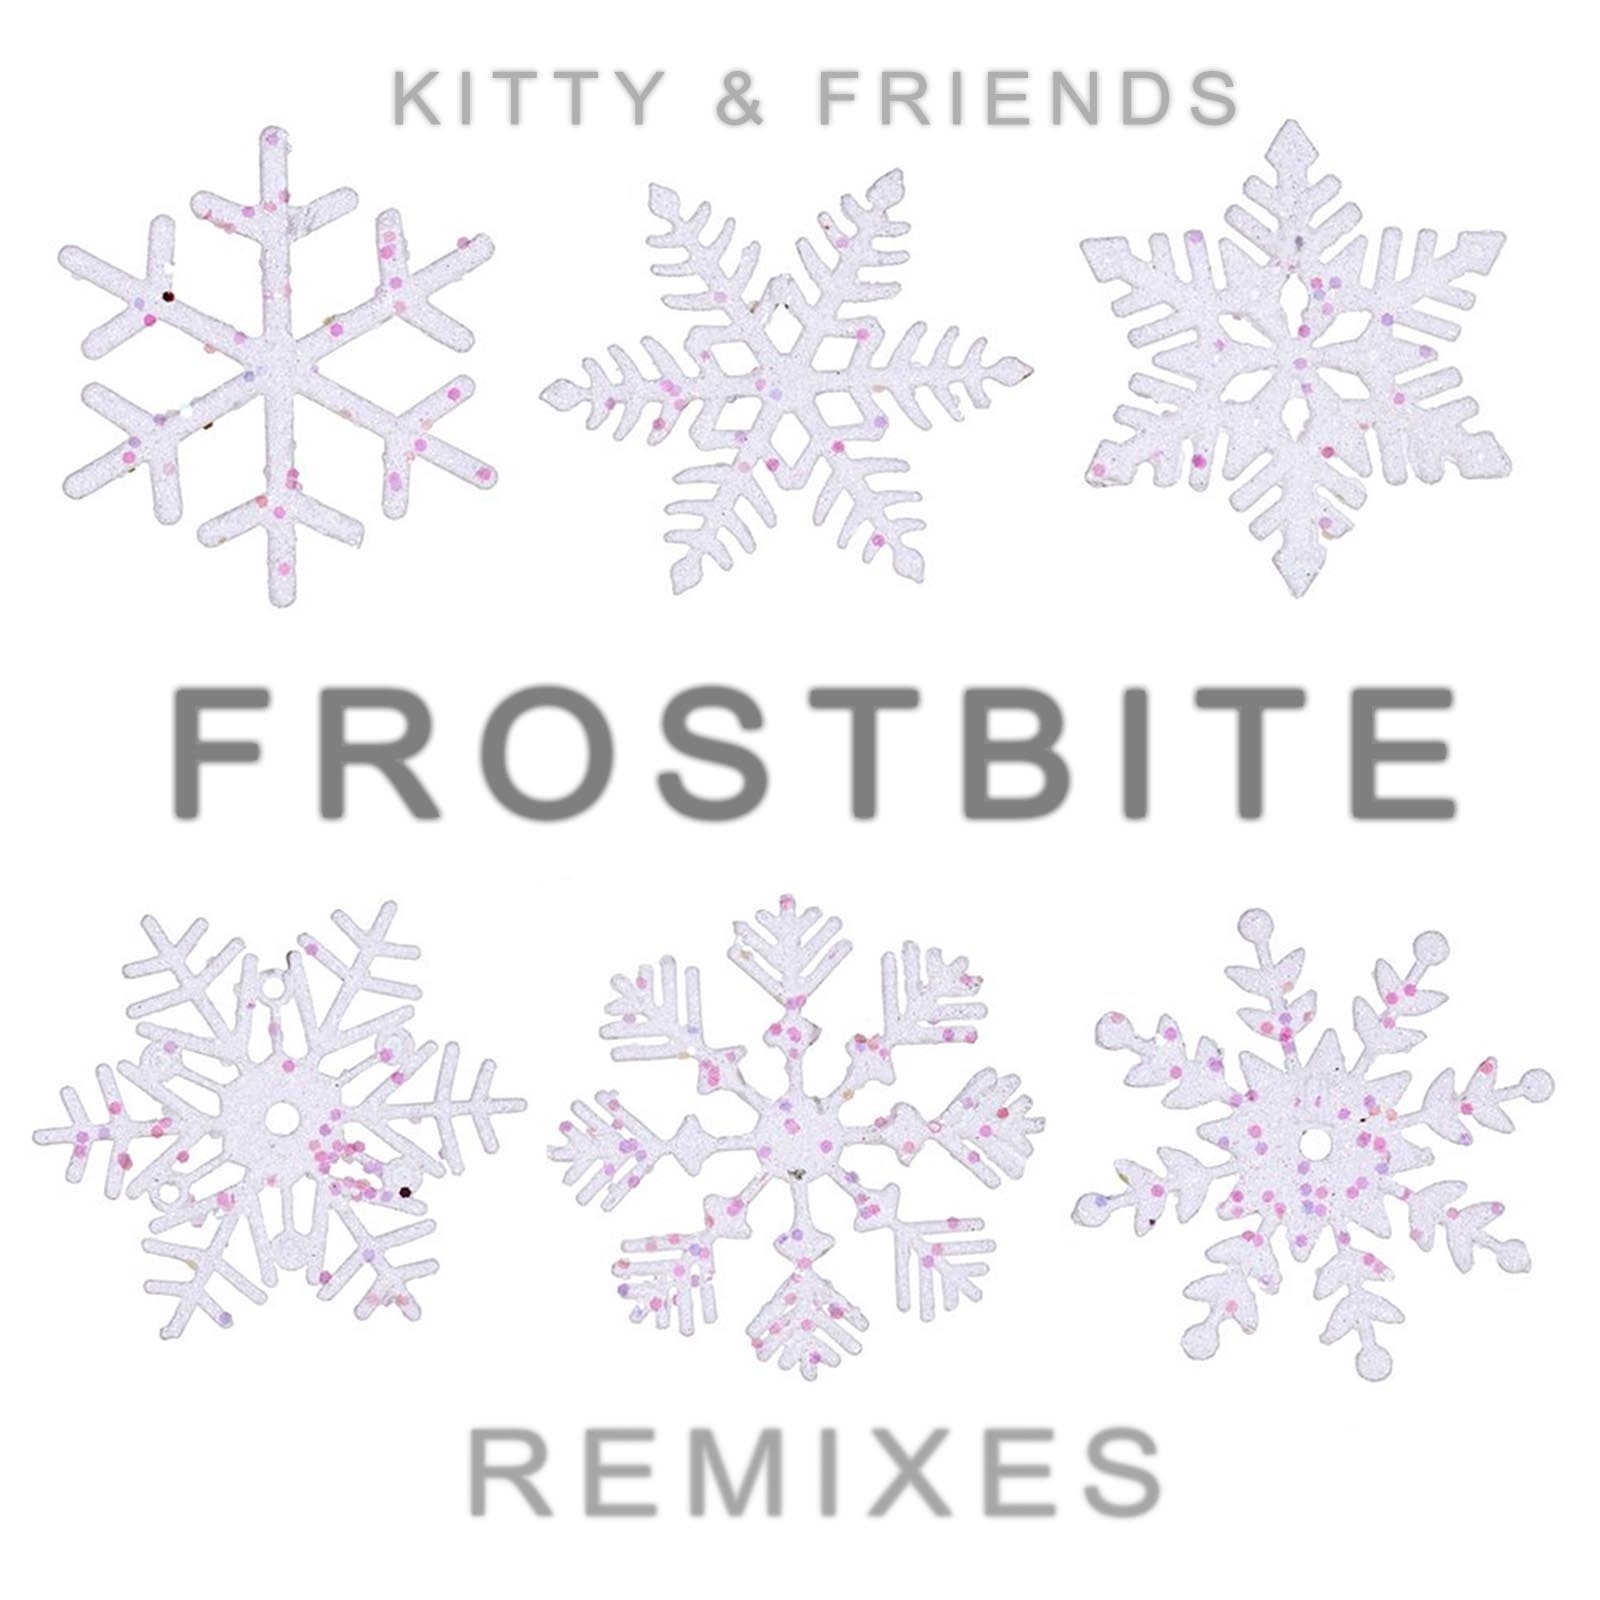 FROSTBITE: THE REMIXES